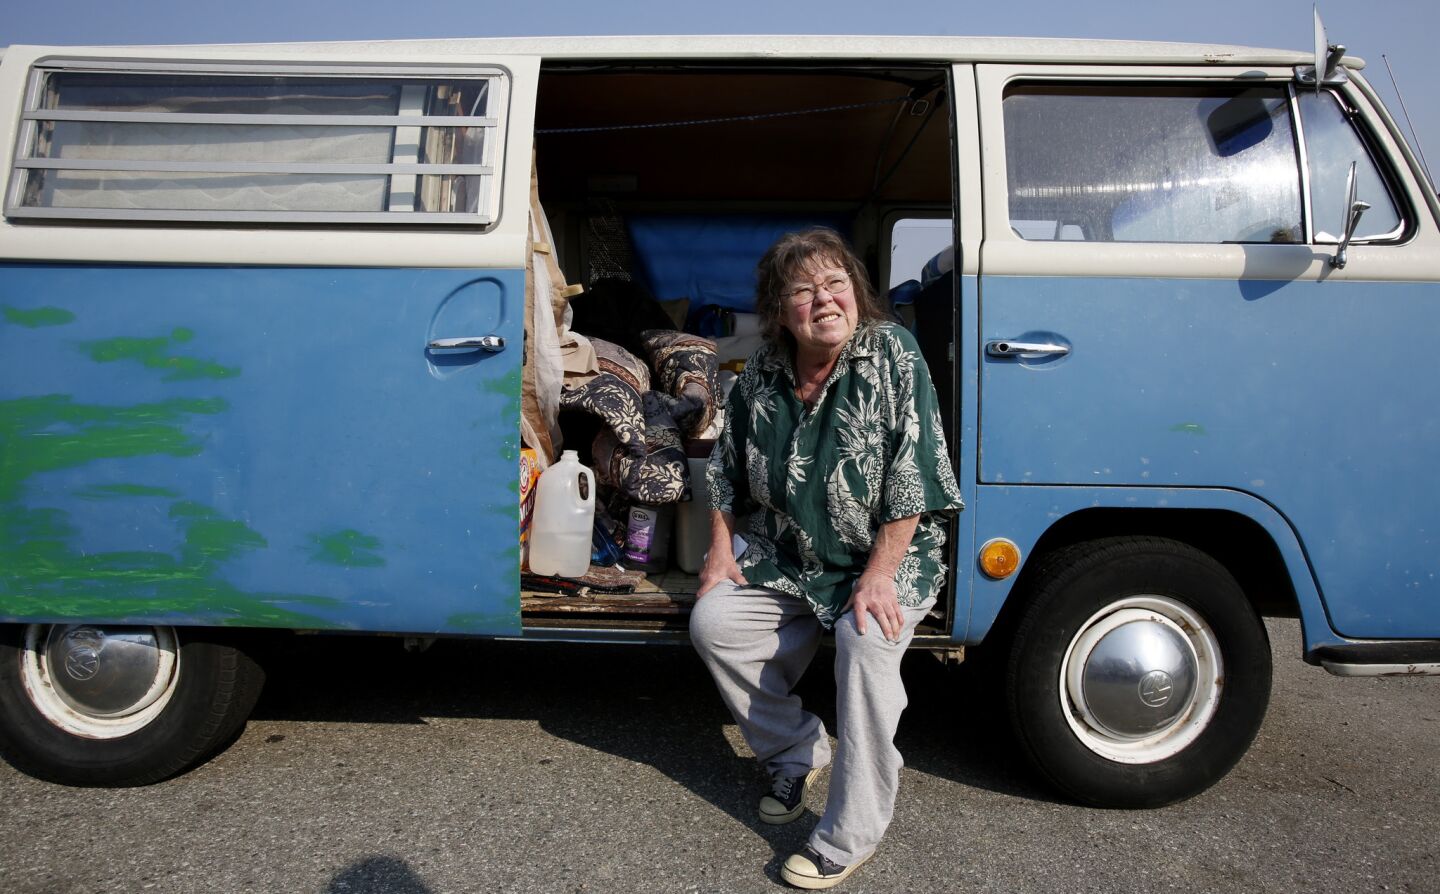 Barbara Lundquist, 71, was evacuated from Idyllwild and spent the night in her 1969 VW van parked near Lake Hemet. Evacuation orders affecting about 6,000 people remained in force Thursday as the Mountain fire near Idyllwild and Fern Valley continued to burn.